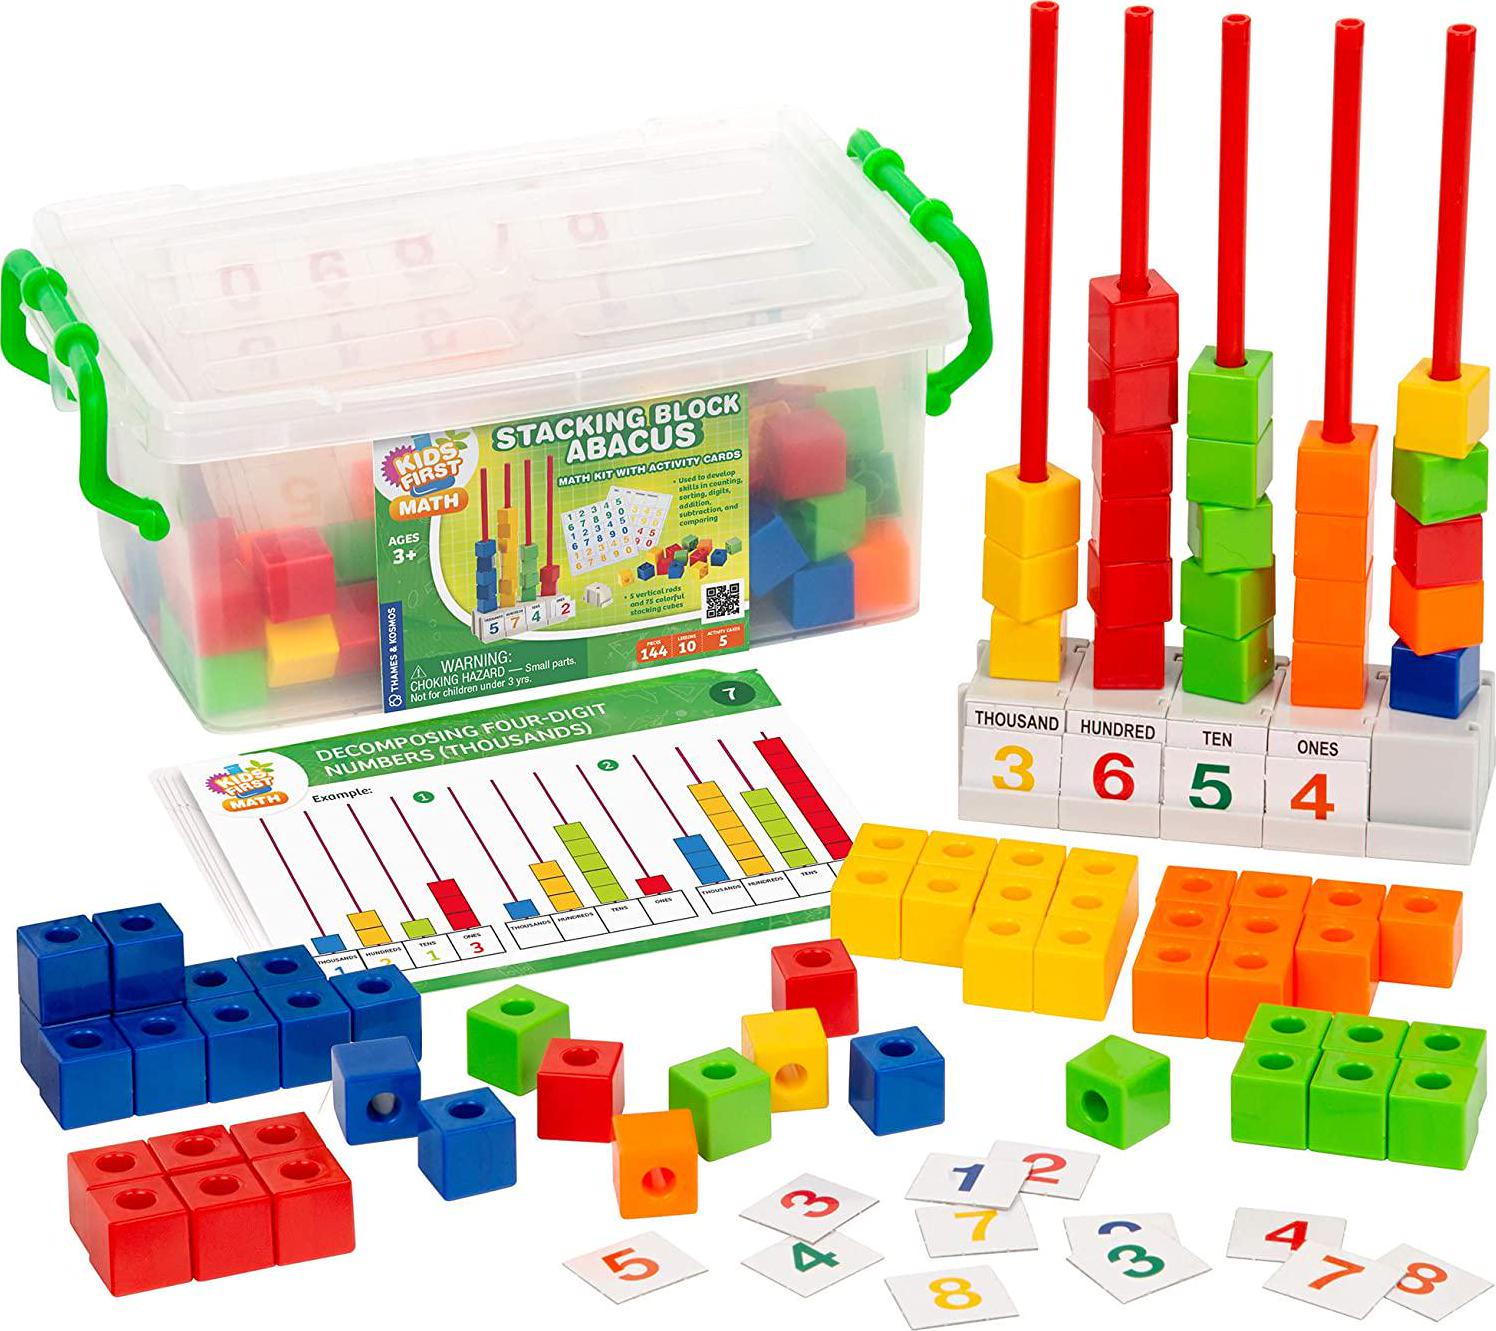 THAMES & KOSMOS, Kids First Math: Stacking Block Abacus Math Kit w/ Activity Cards | Develop Skills in Counting, Sorting, Subtraction, Addition and More | Visual Hands-on Math for at-Home or Classroom Learning, Ages 3+